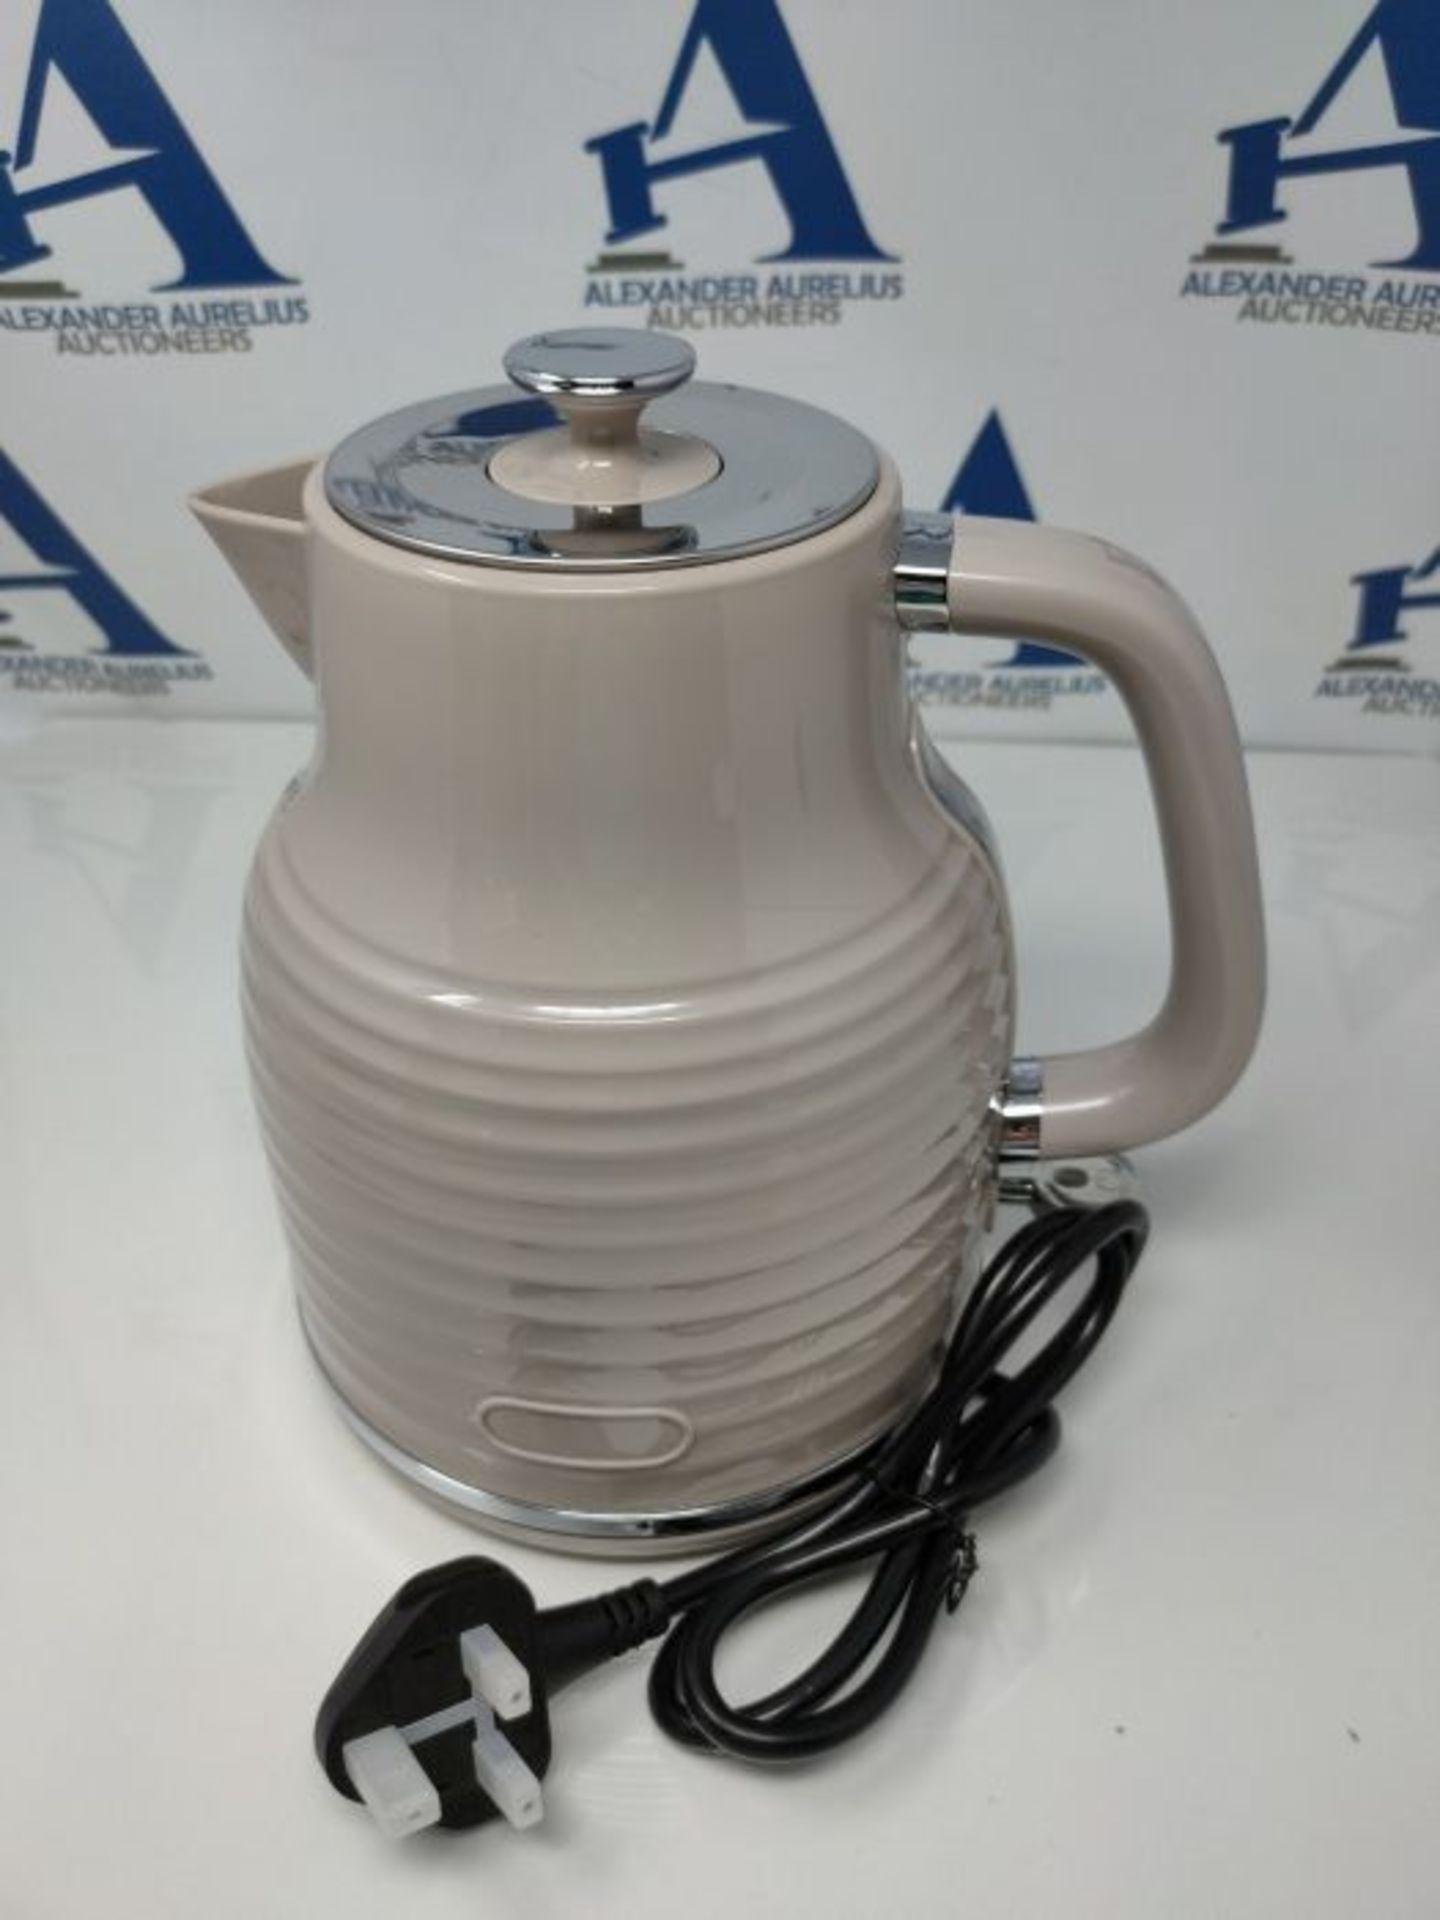 Daewoo Sienna Collection Jug Kettle, Family Sized 1.7 Litre Capacity, Fast Boil, Easy - Image 3 of 3